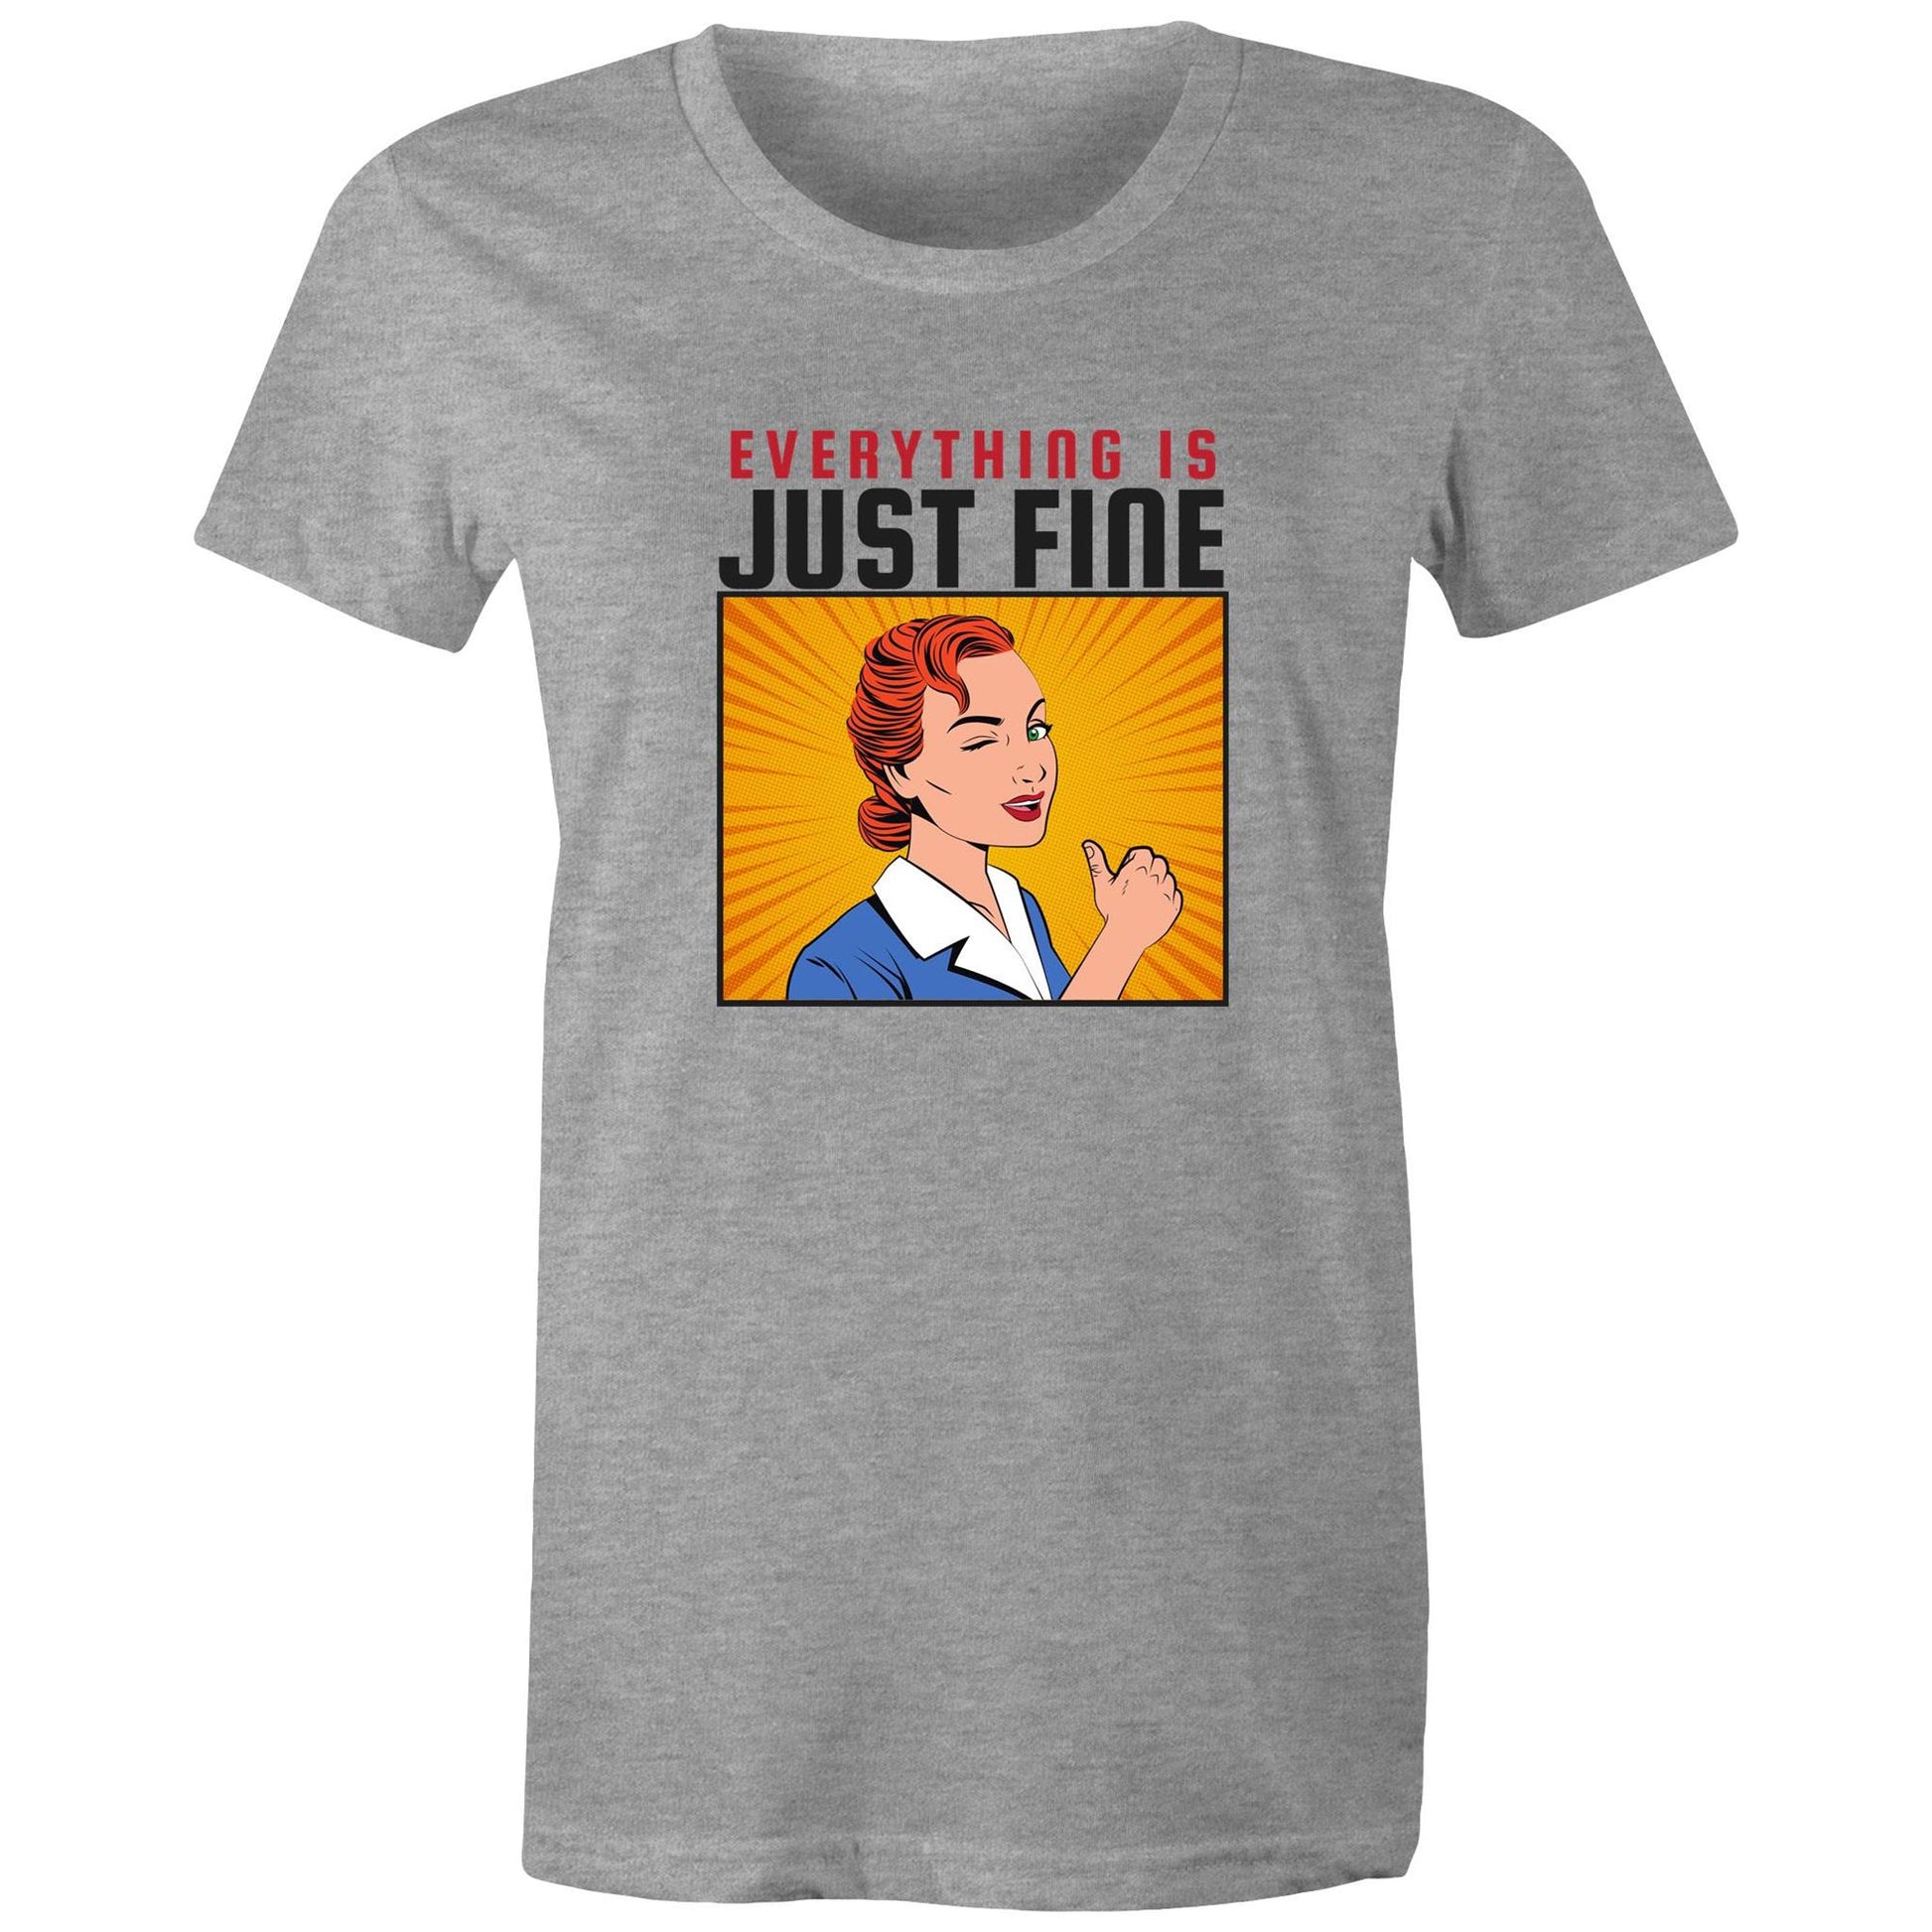 Everything Is Just Fine - Womens T-shirt Grey Marle Womens T-shirt comic Retro